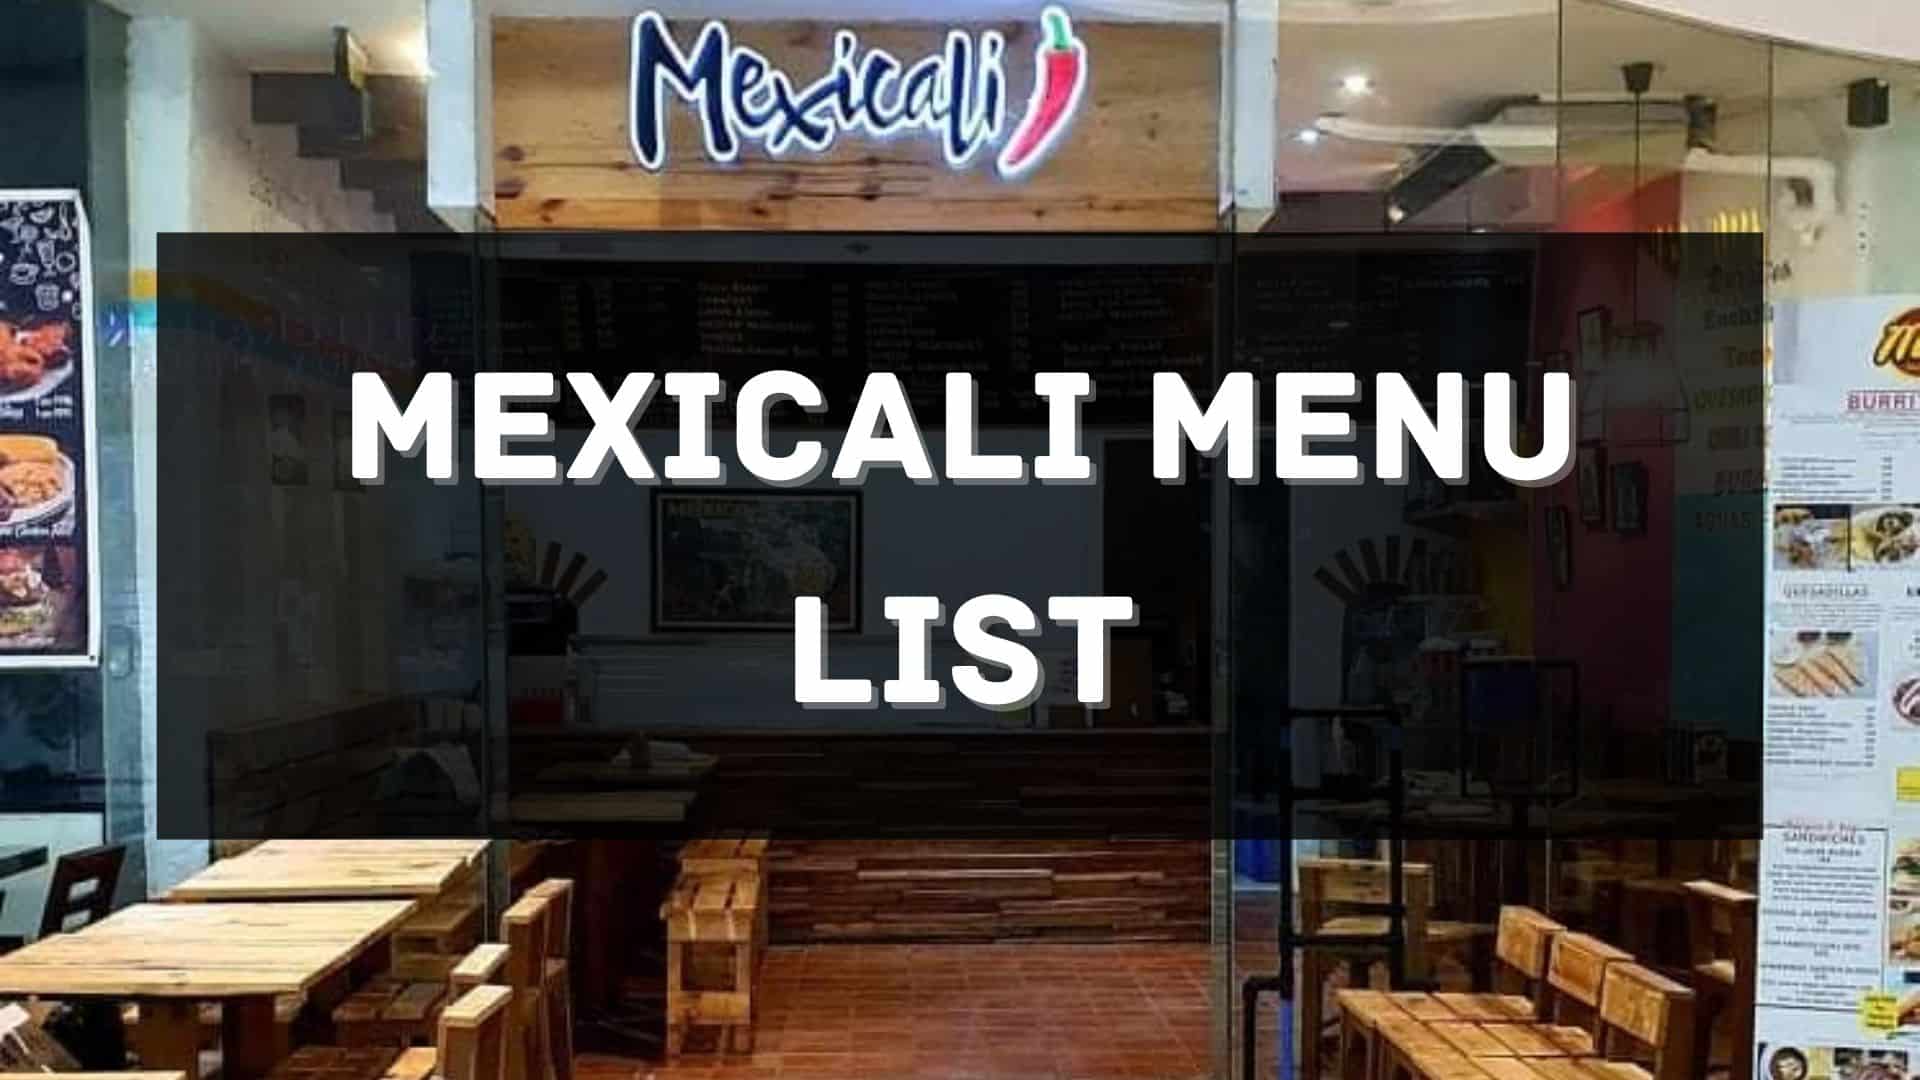 mexicali menu prices philippines